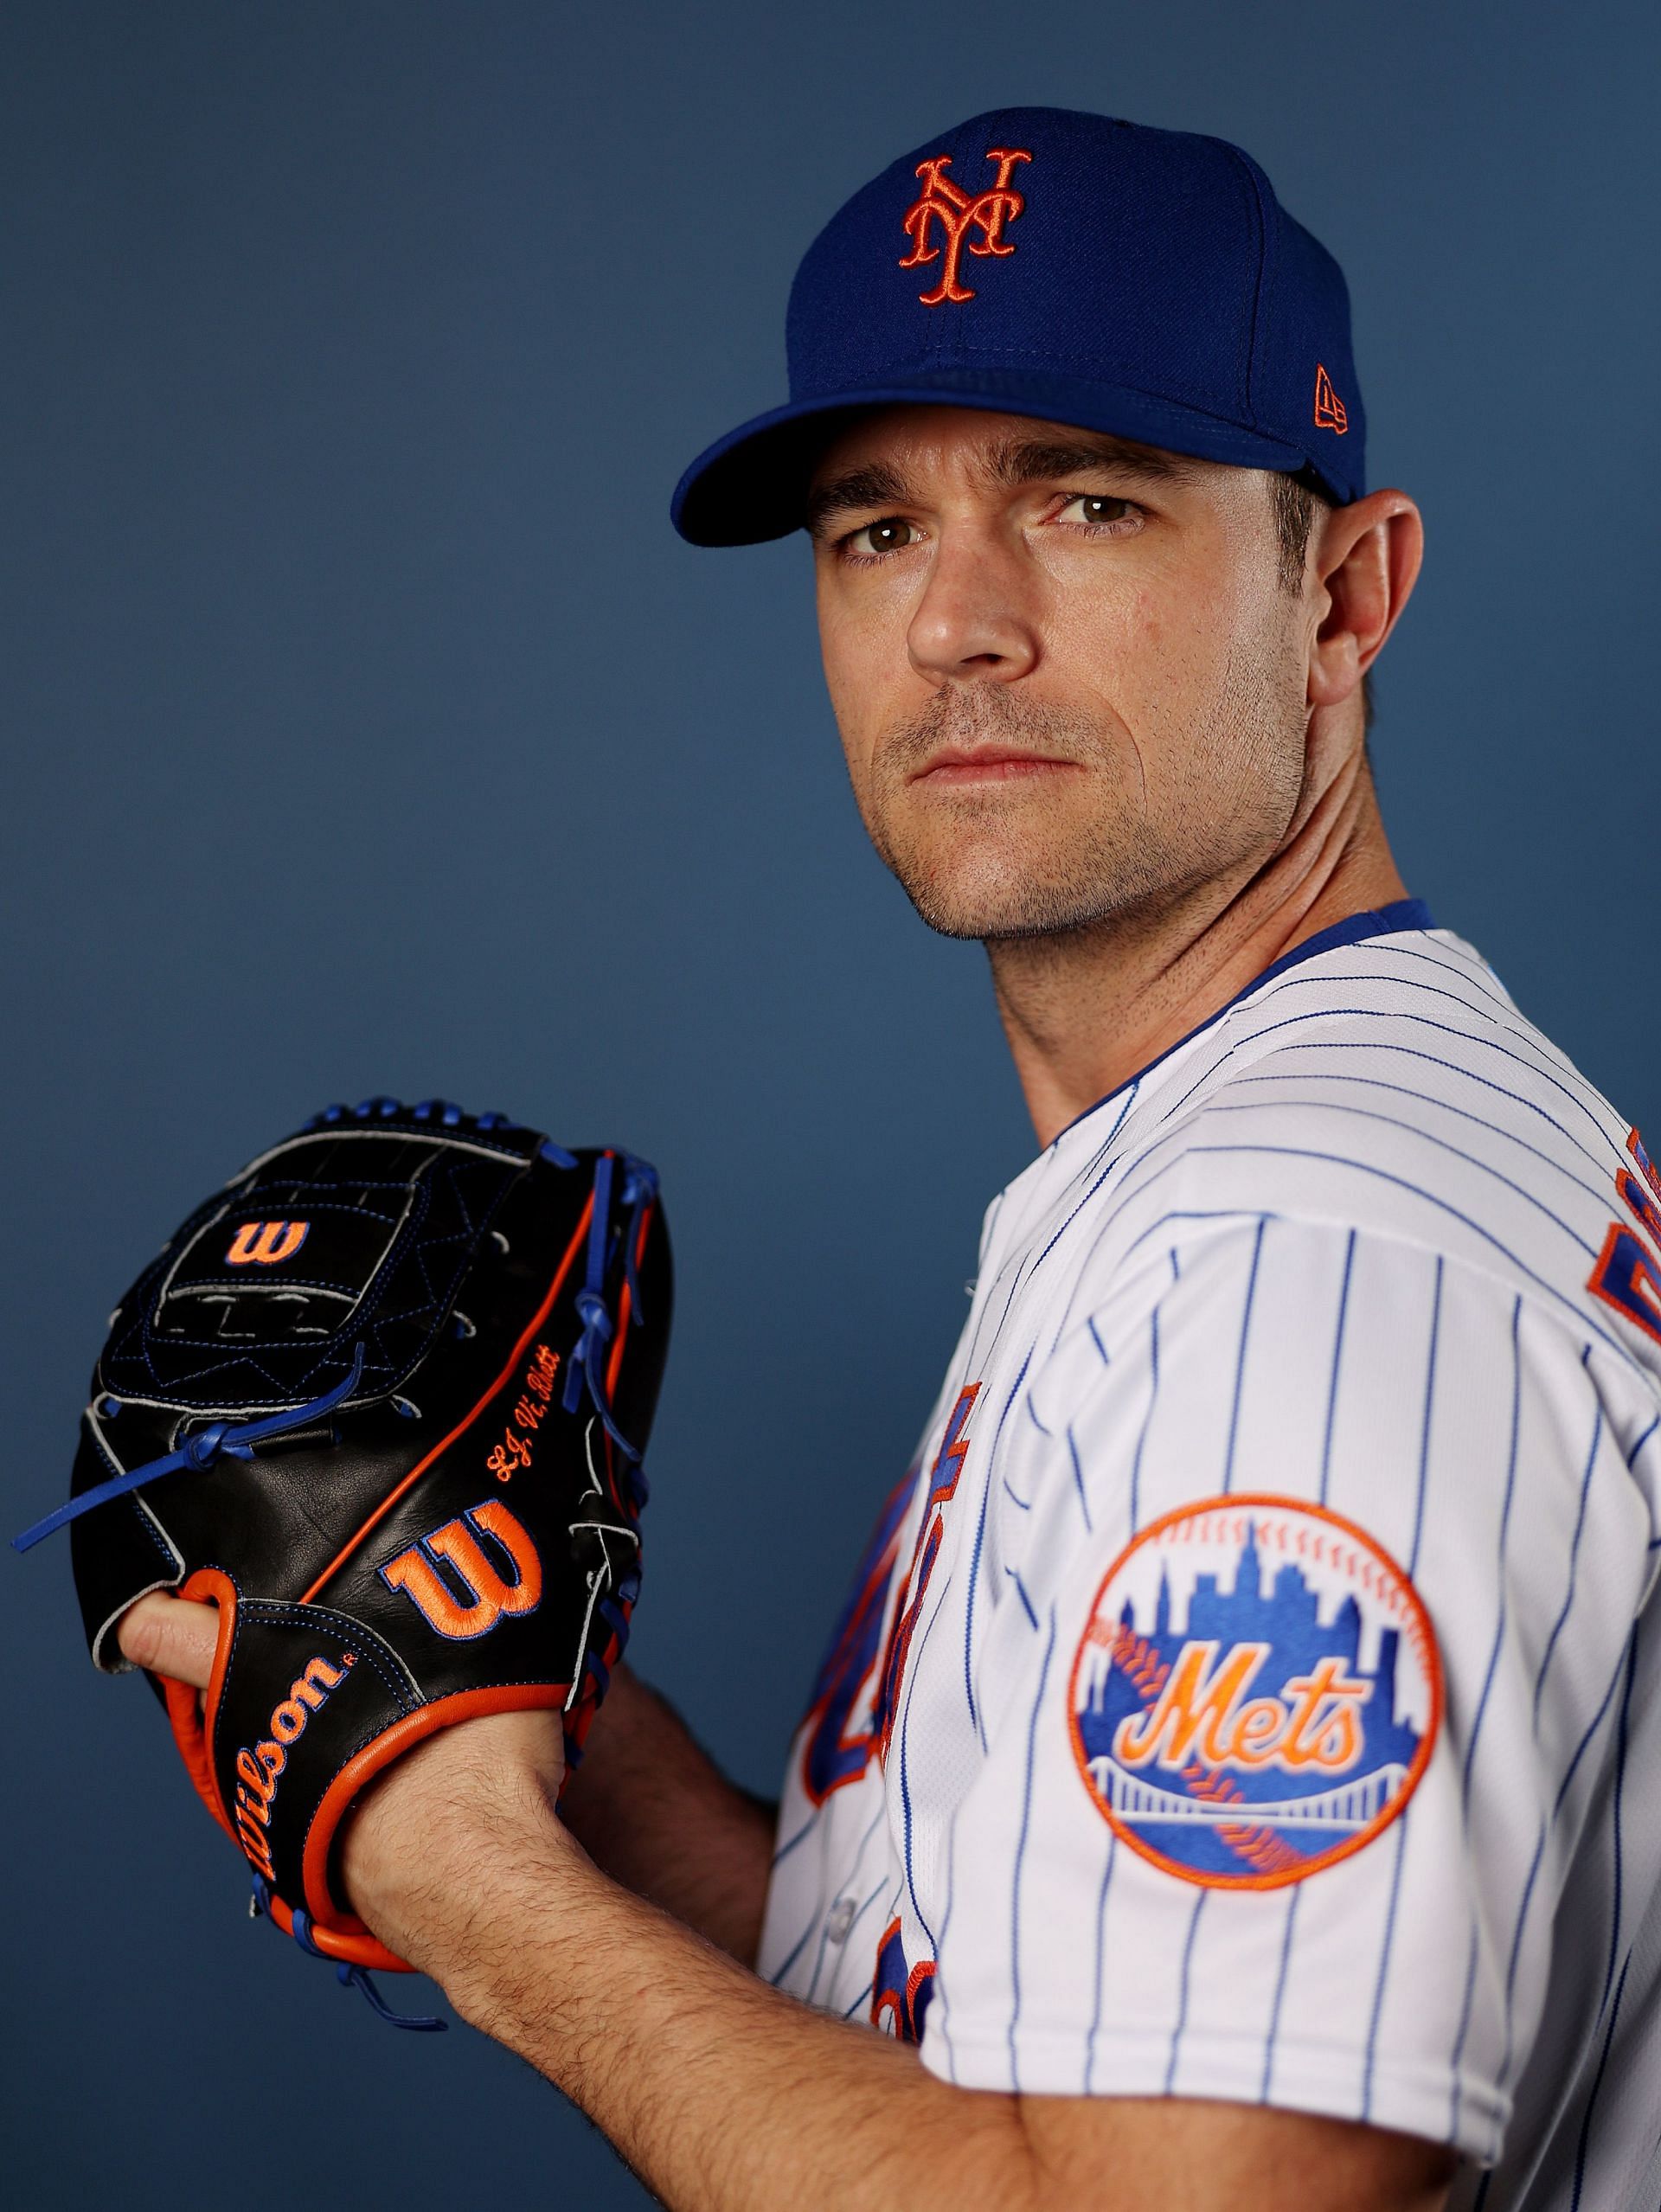 New York Mets Photo Day: PORT ST. LUCIE, FLORIDA - FEBRUARY 23: David of the New York Mets poses for a portrait during New York Mets Photo Day at Clover Park on February 23, 2023, in Port St. Lucie, Florida. (Photo by Elsa/Getty Images)